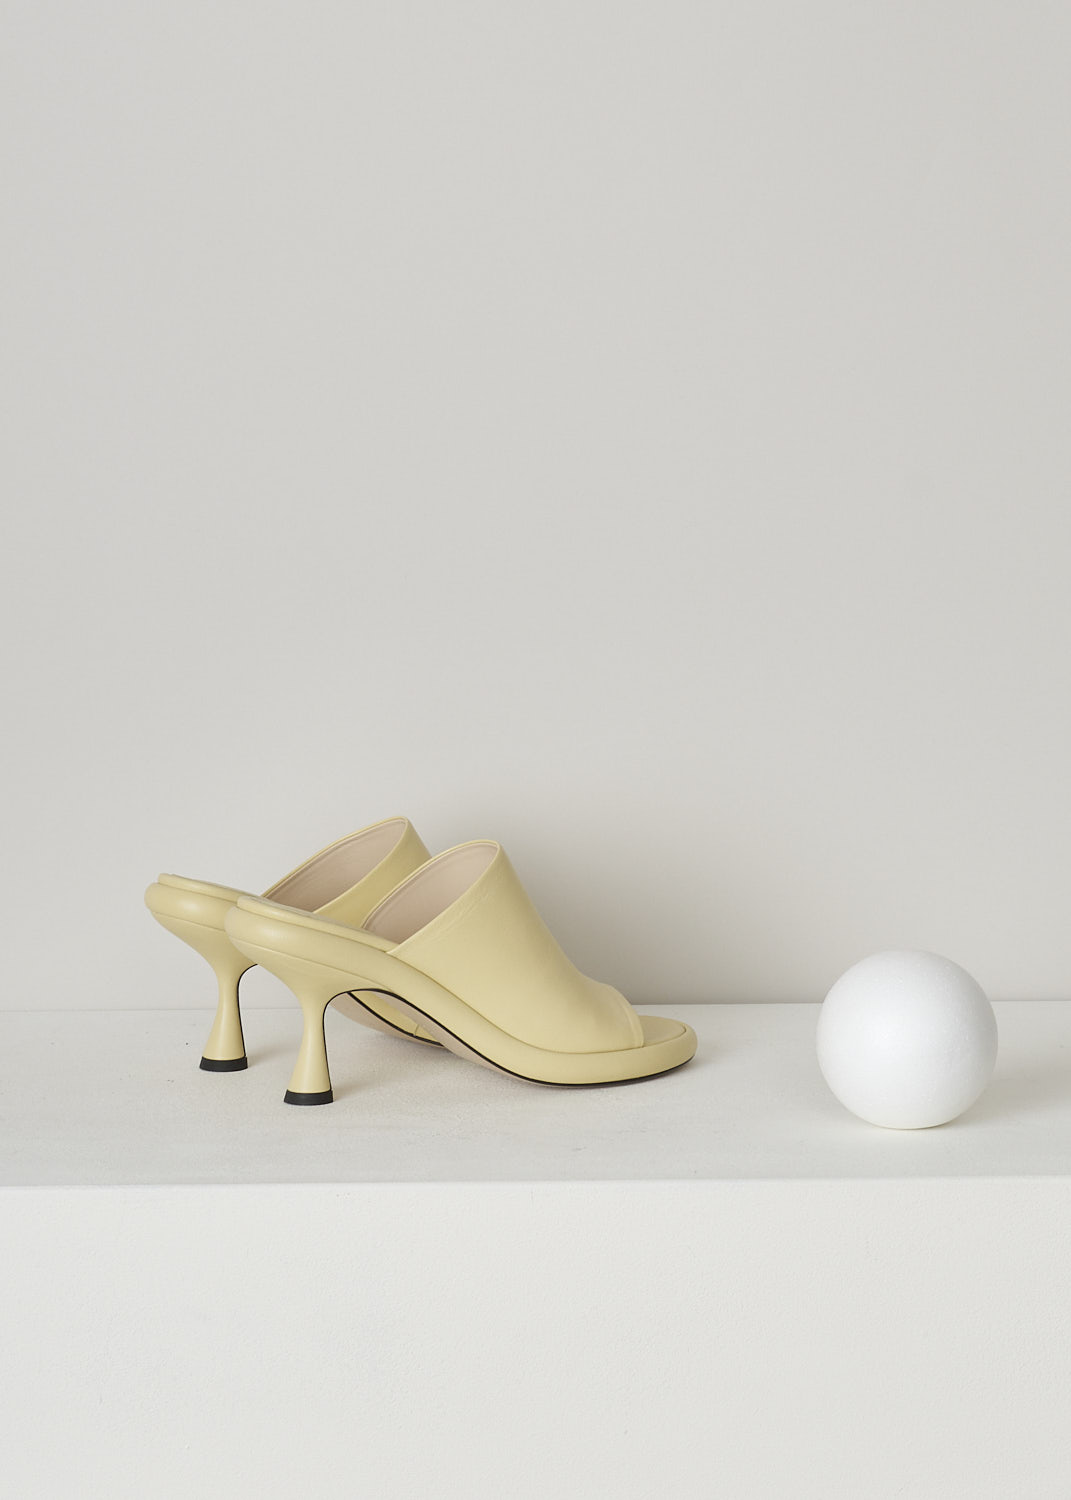 WANDLER, JUNE PLATFORM PUMP IN CANDLE, 22208_871201_1435, Yellow, Back, These pale yellow heeled slip-on mules have a broad strap across the vamp, a rounded open-toe and a platform sole. The slip-on mules have a mid-height spool heel.
